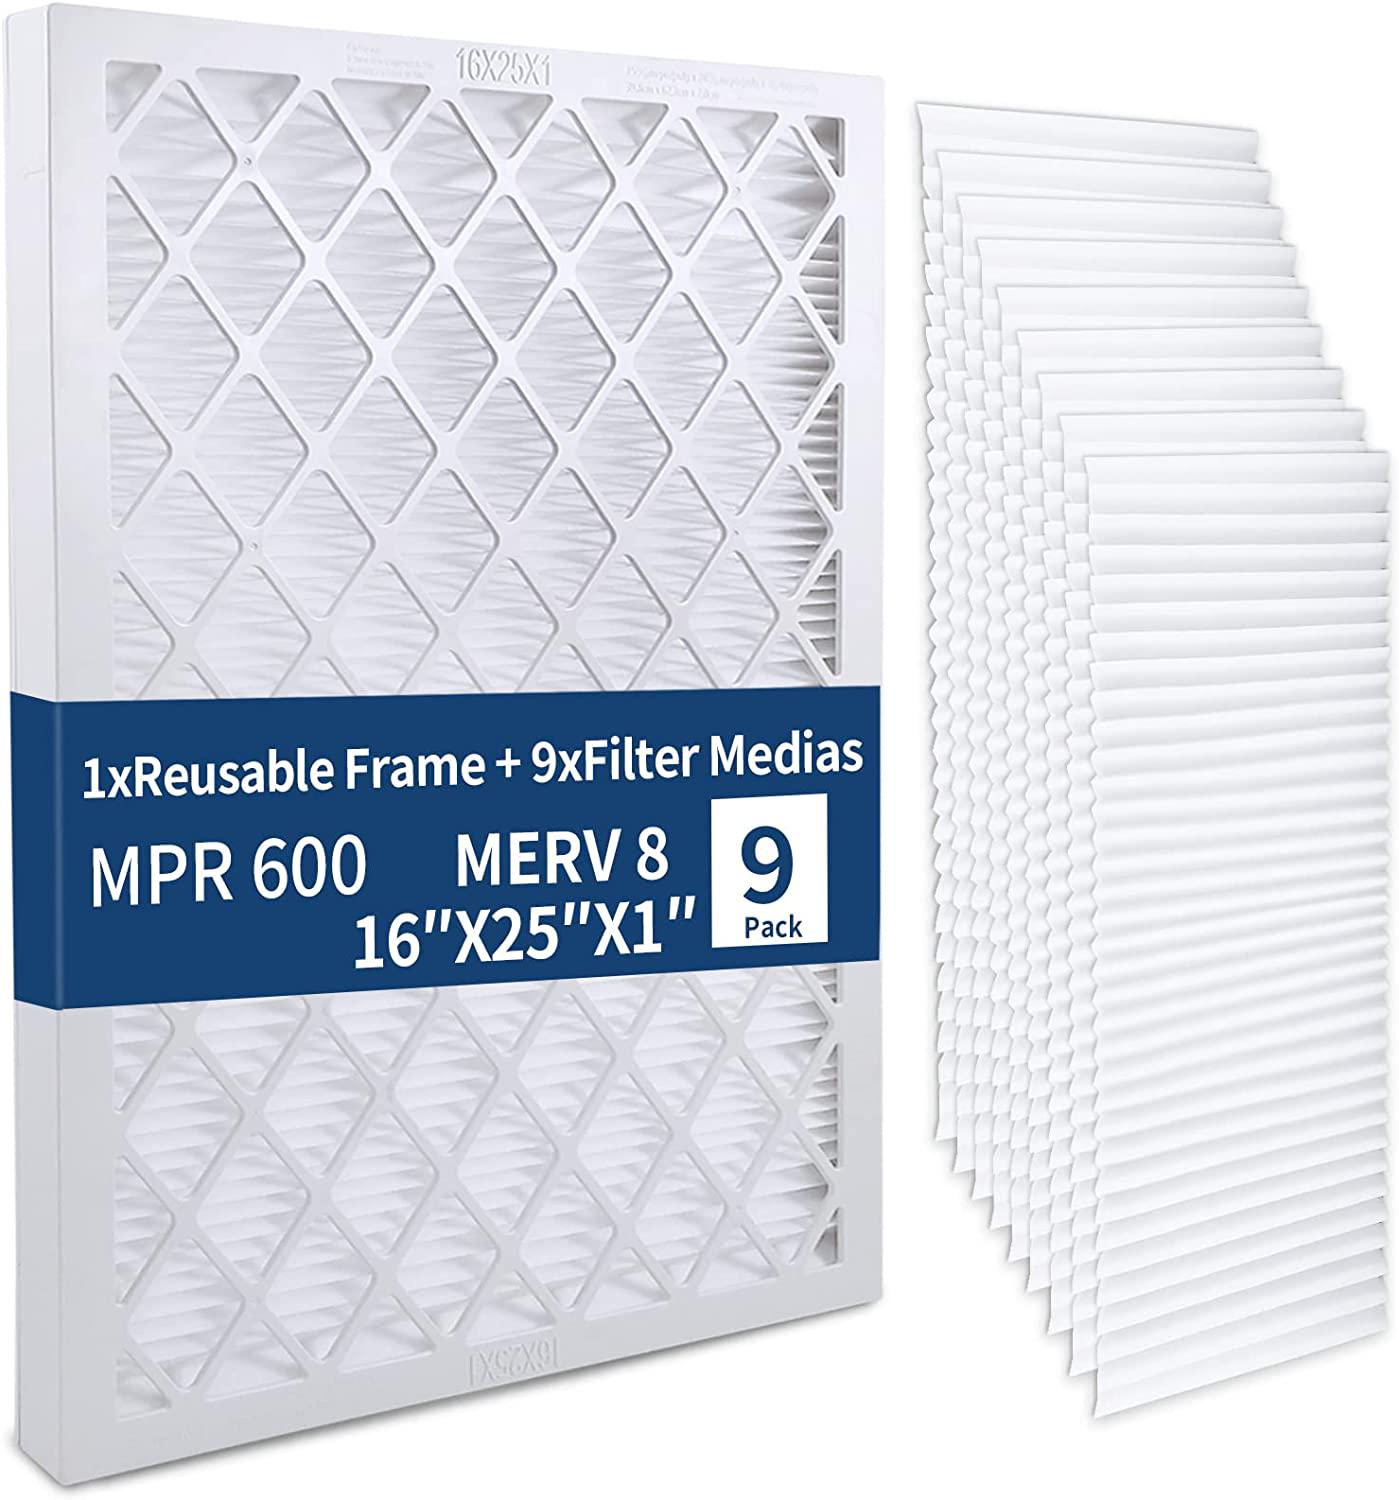 RENR Air Filter16x25x1， 9-Pack MERV8 MPR 600 AC Furnace Air Filters， 1x Reusable Frame+9 x Filter Medias， HVAC Filters， Deep Pleated Air Cleaner， Breathe Safer Home and Office Environments